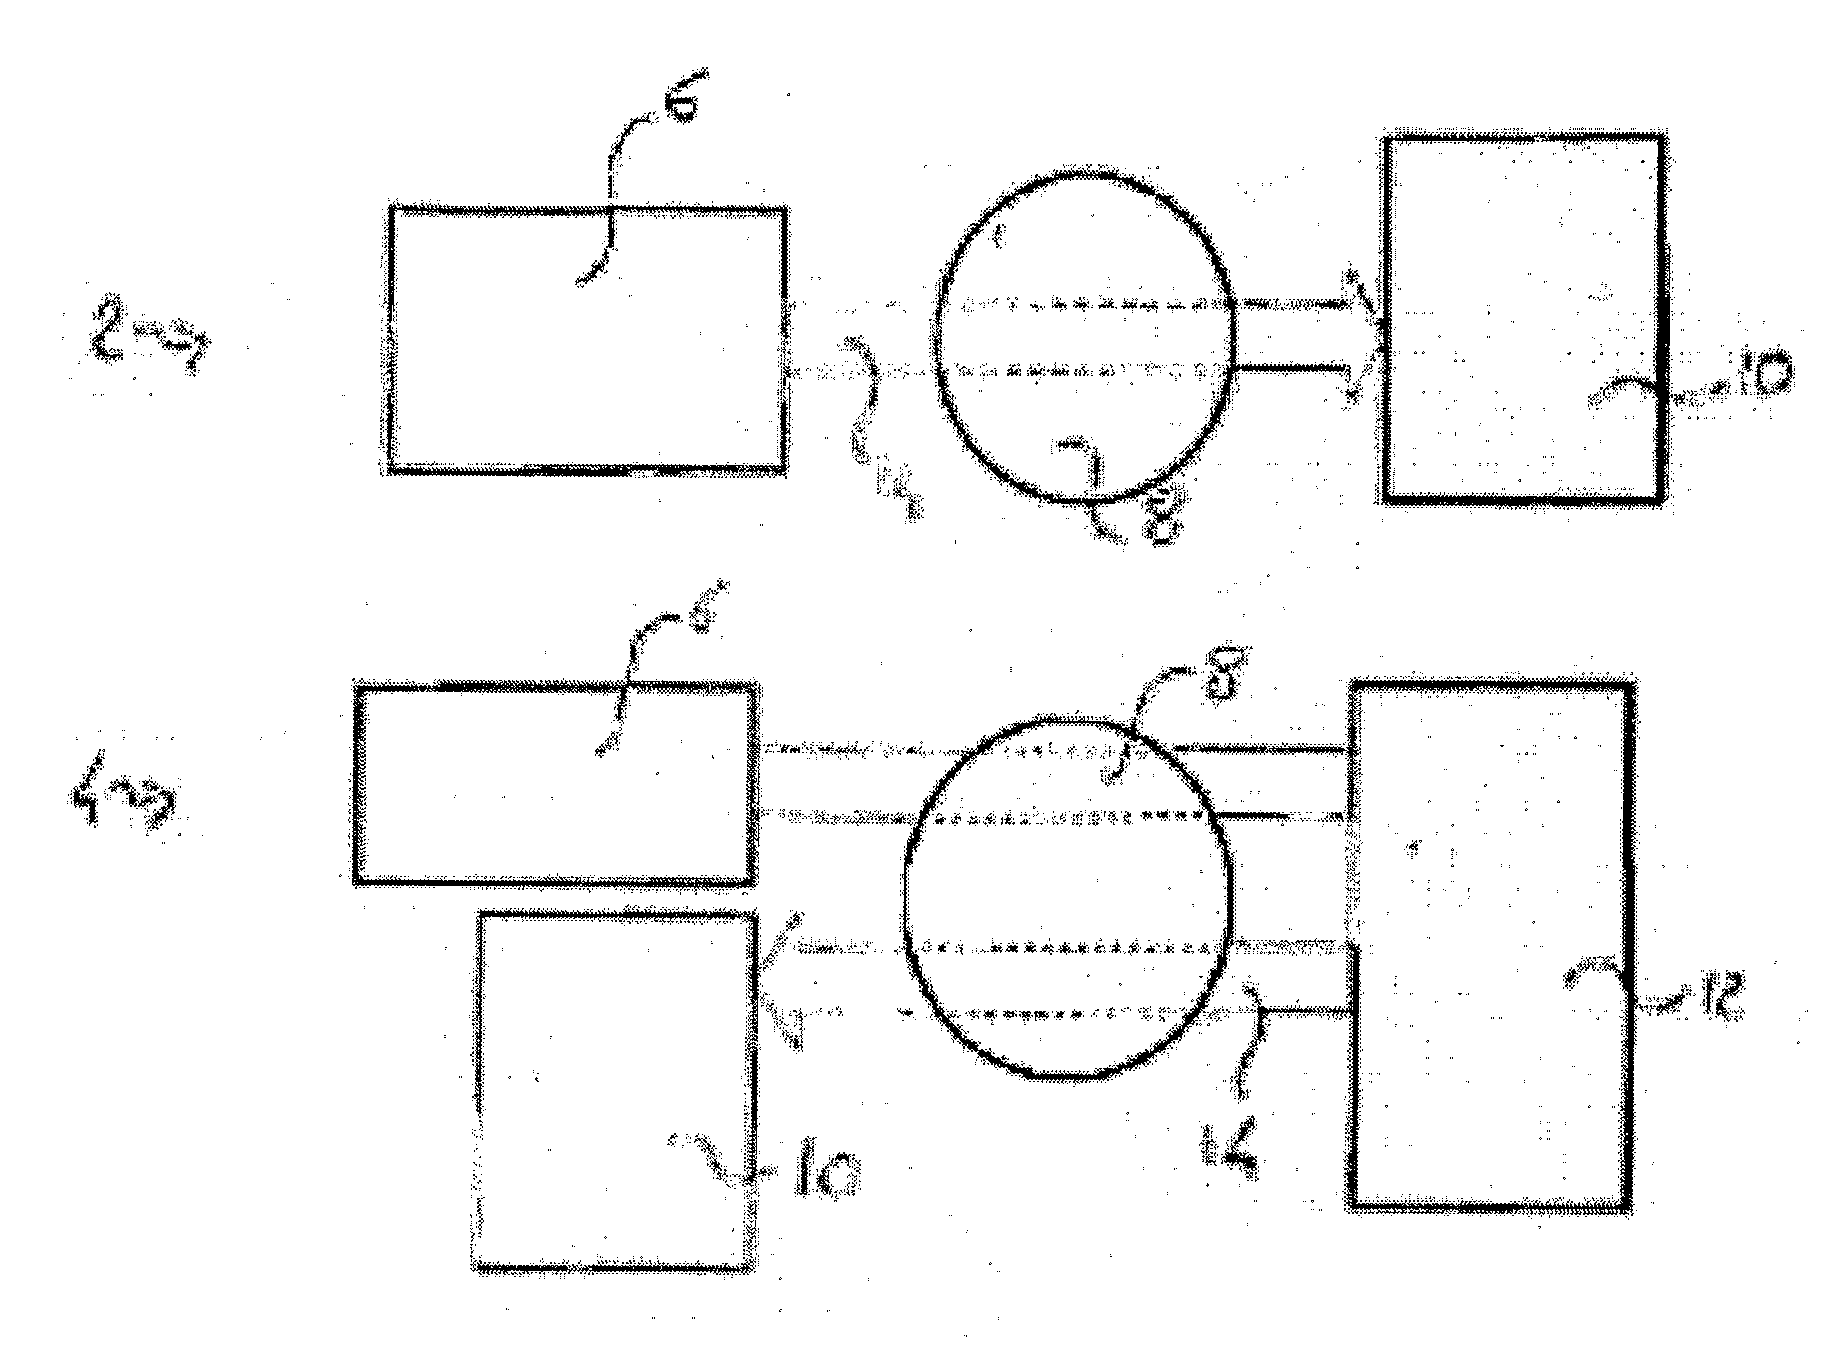 Method for the automated measurement of gas pressure and concentration inside sealed containers